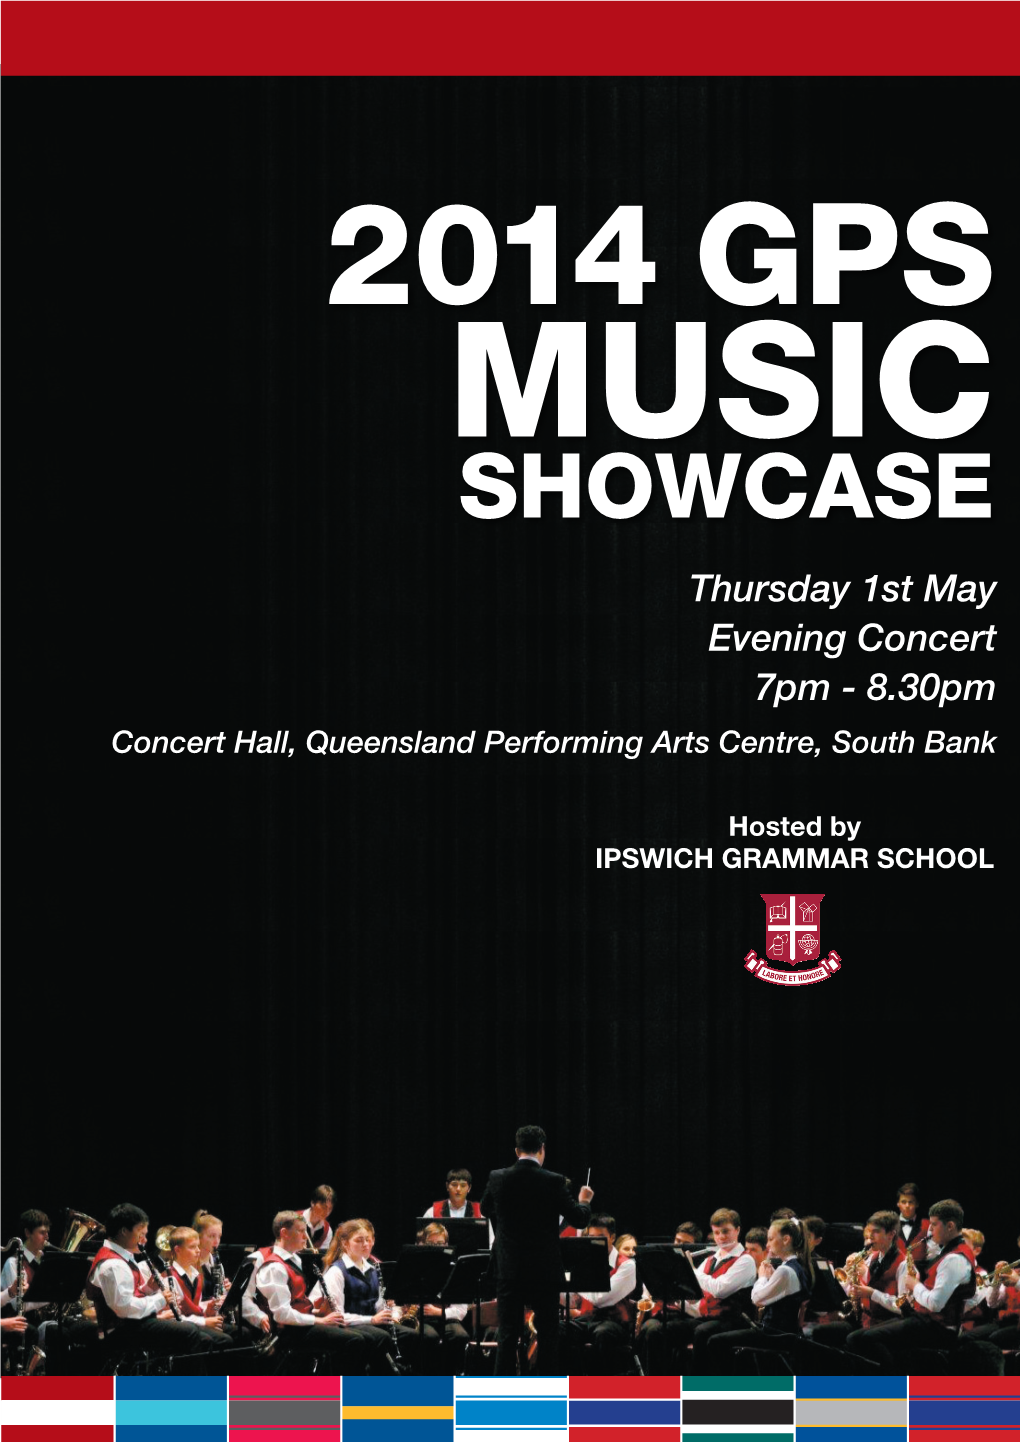 2014 GPS MUSIC SHOWCASE Thursday 1St May Evening Concert 7Pm - 8.30Pm Concert Hall, Queensland Performing Arts Centre, South Bank